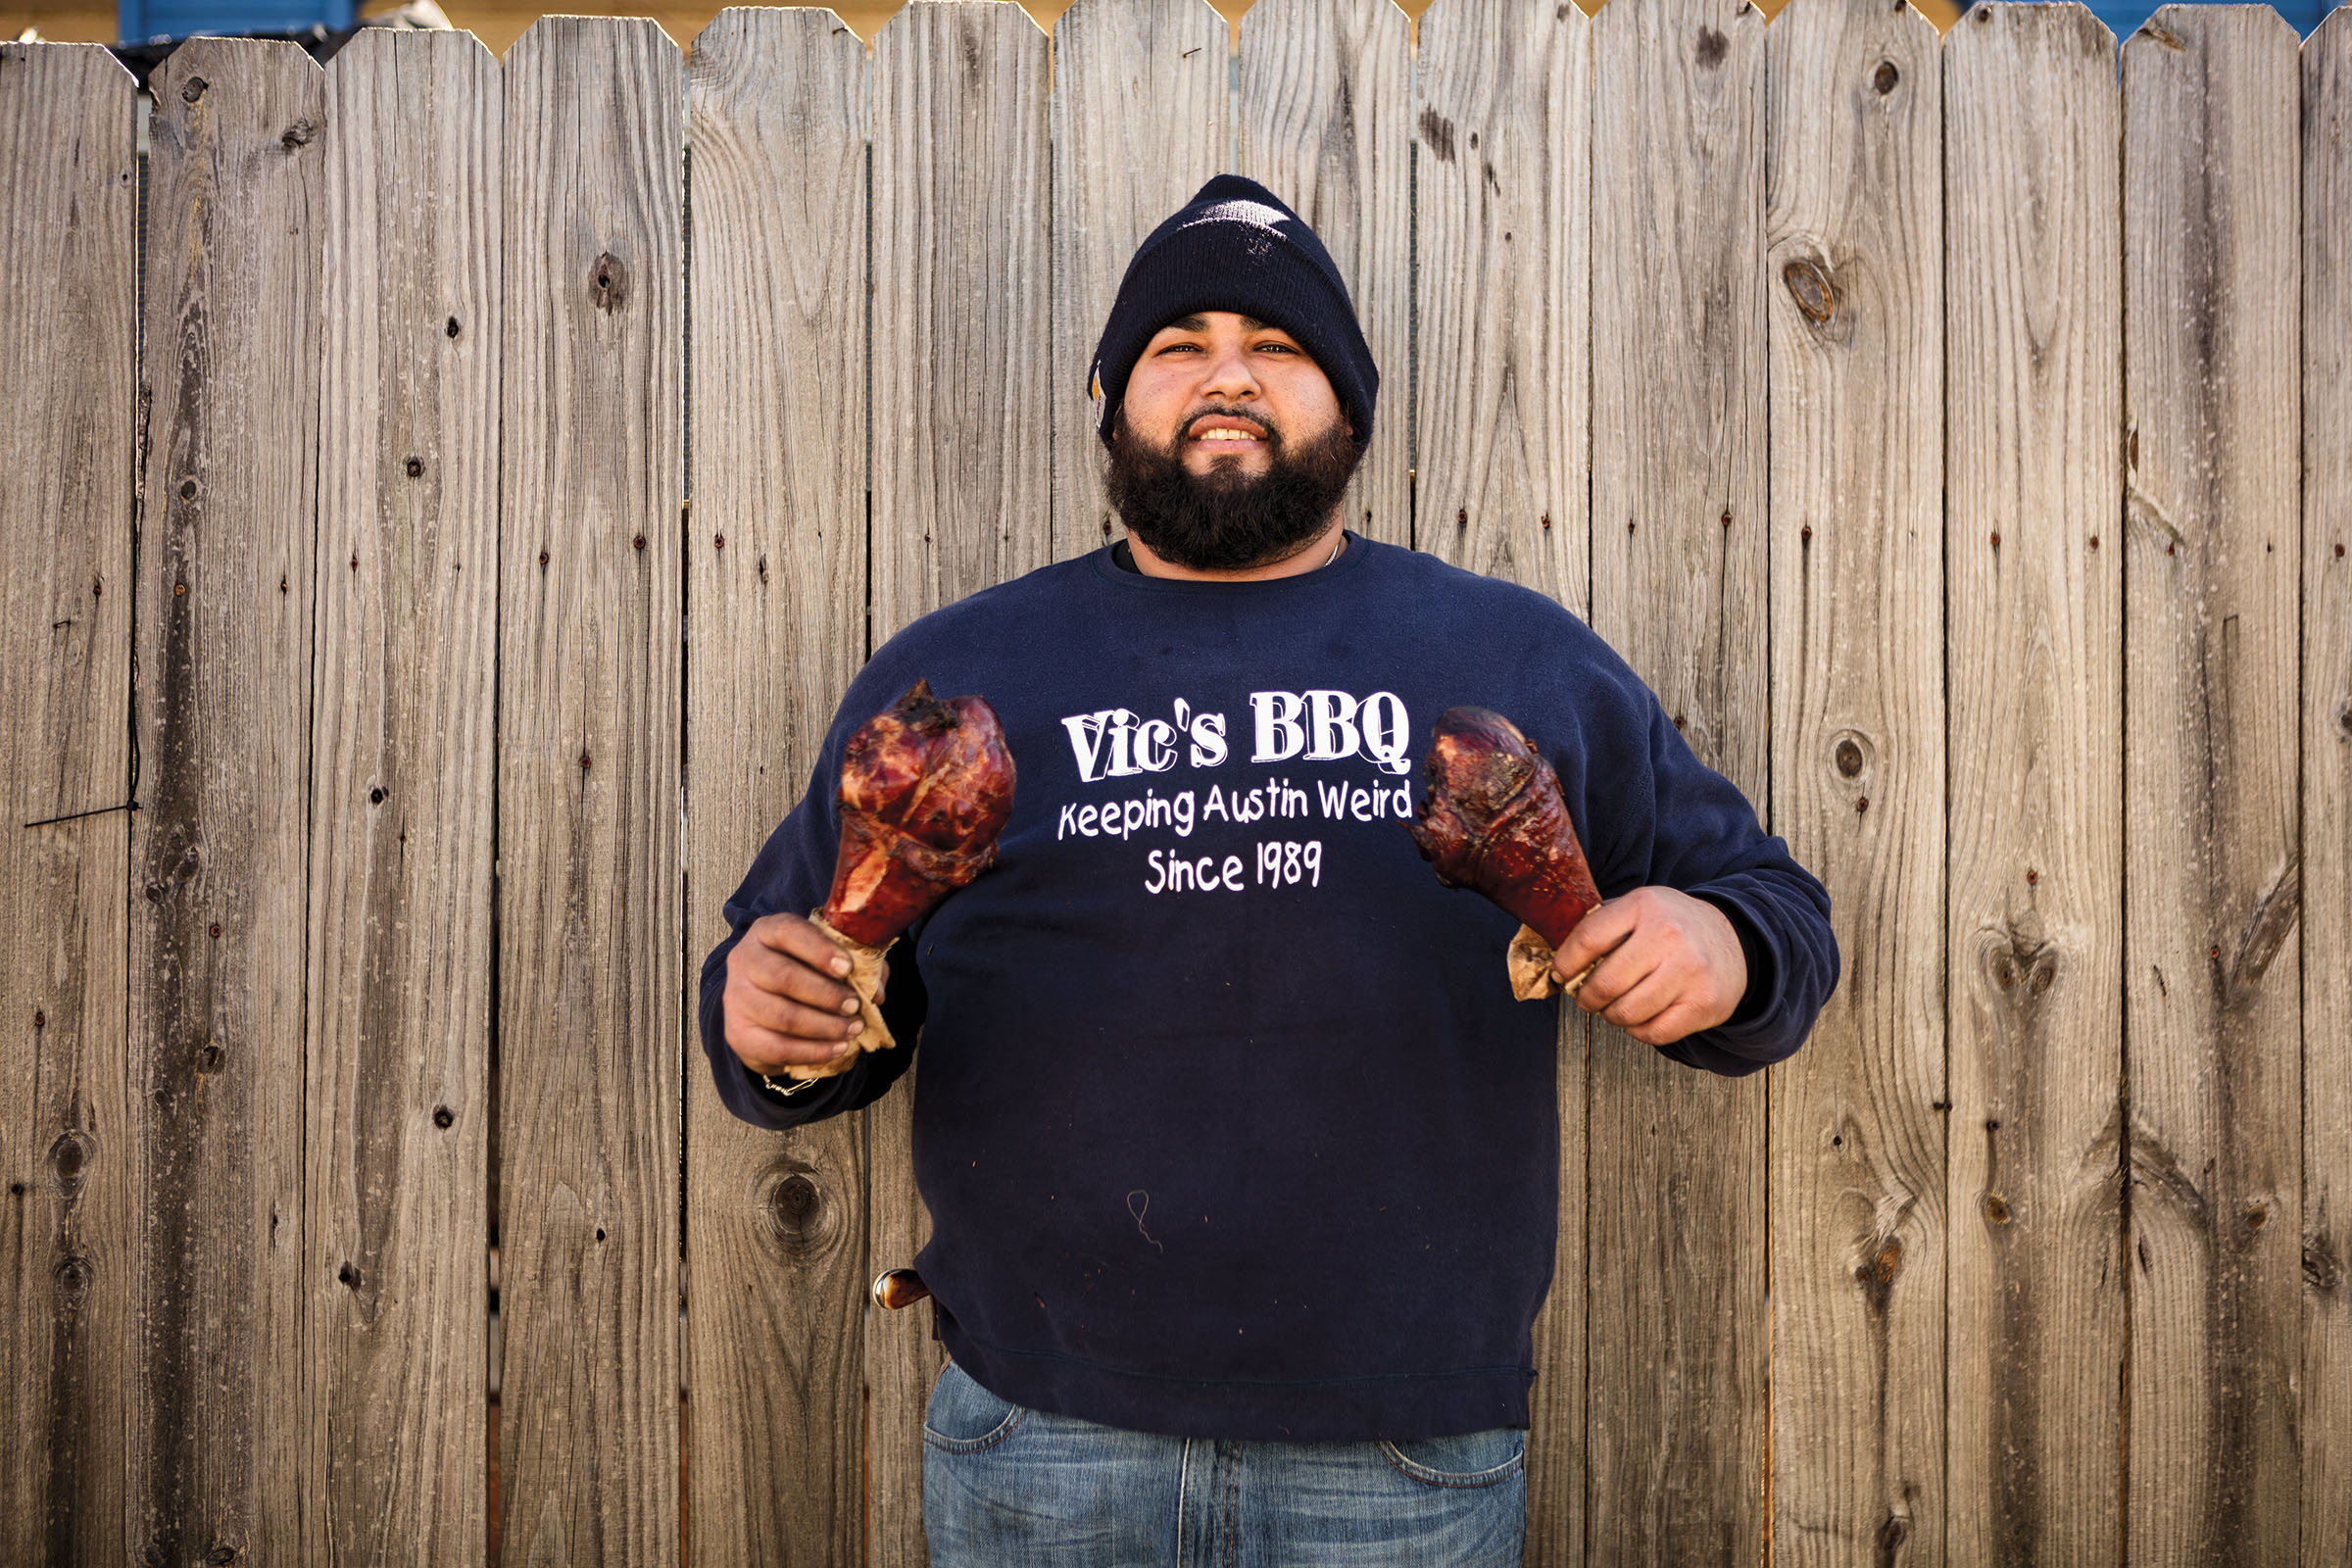 A man wearing a blue sweatshirt reading "Vic's BBQ" poses with two large turkey legs, one in each hand